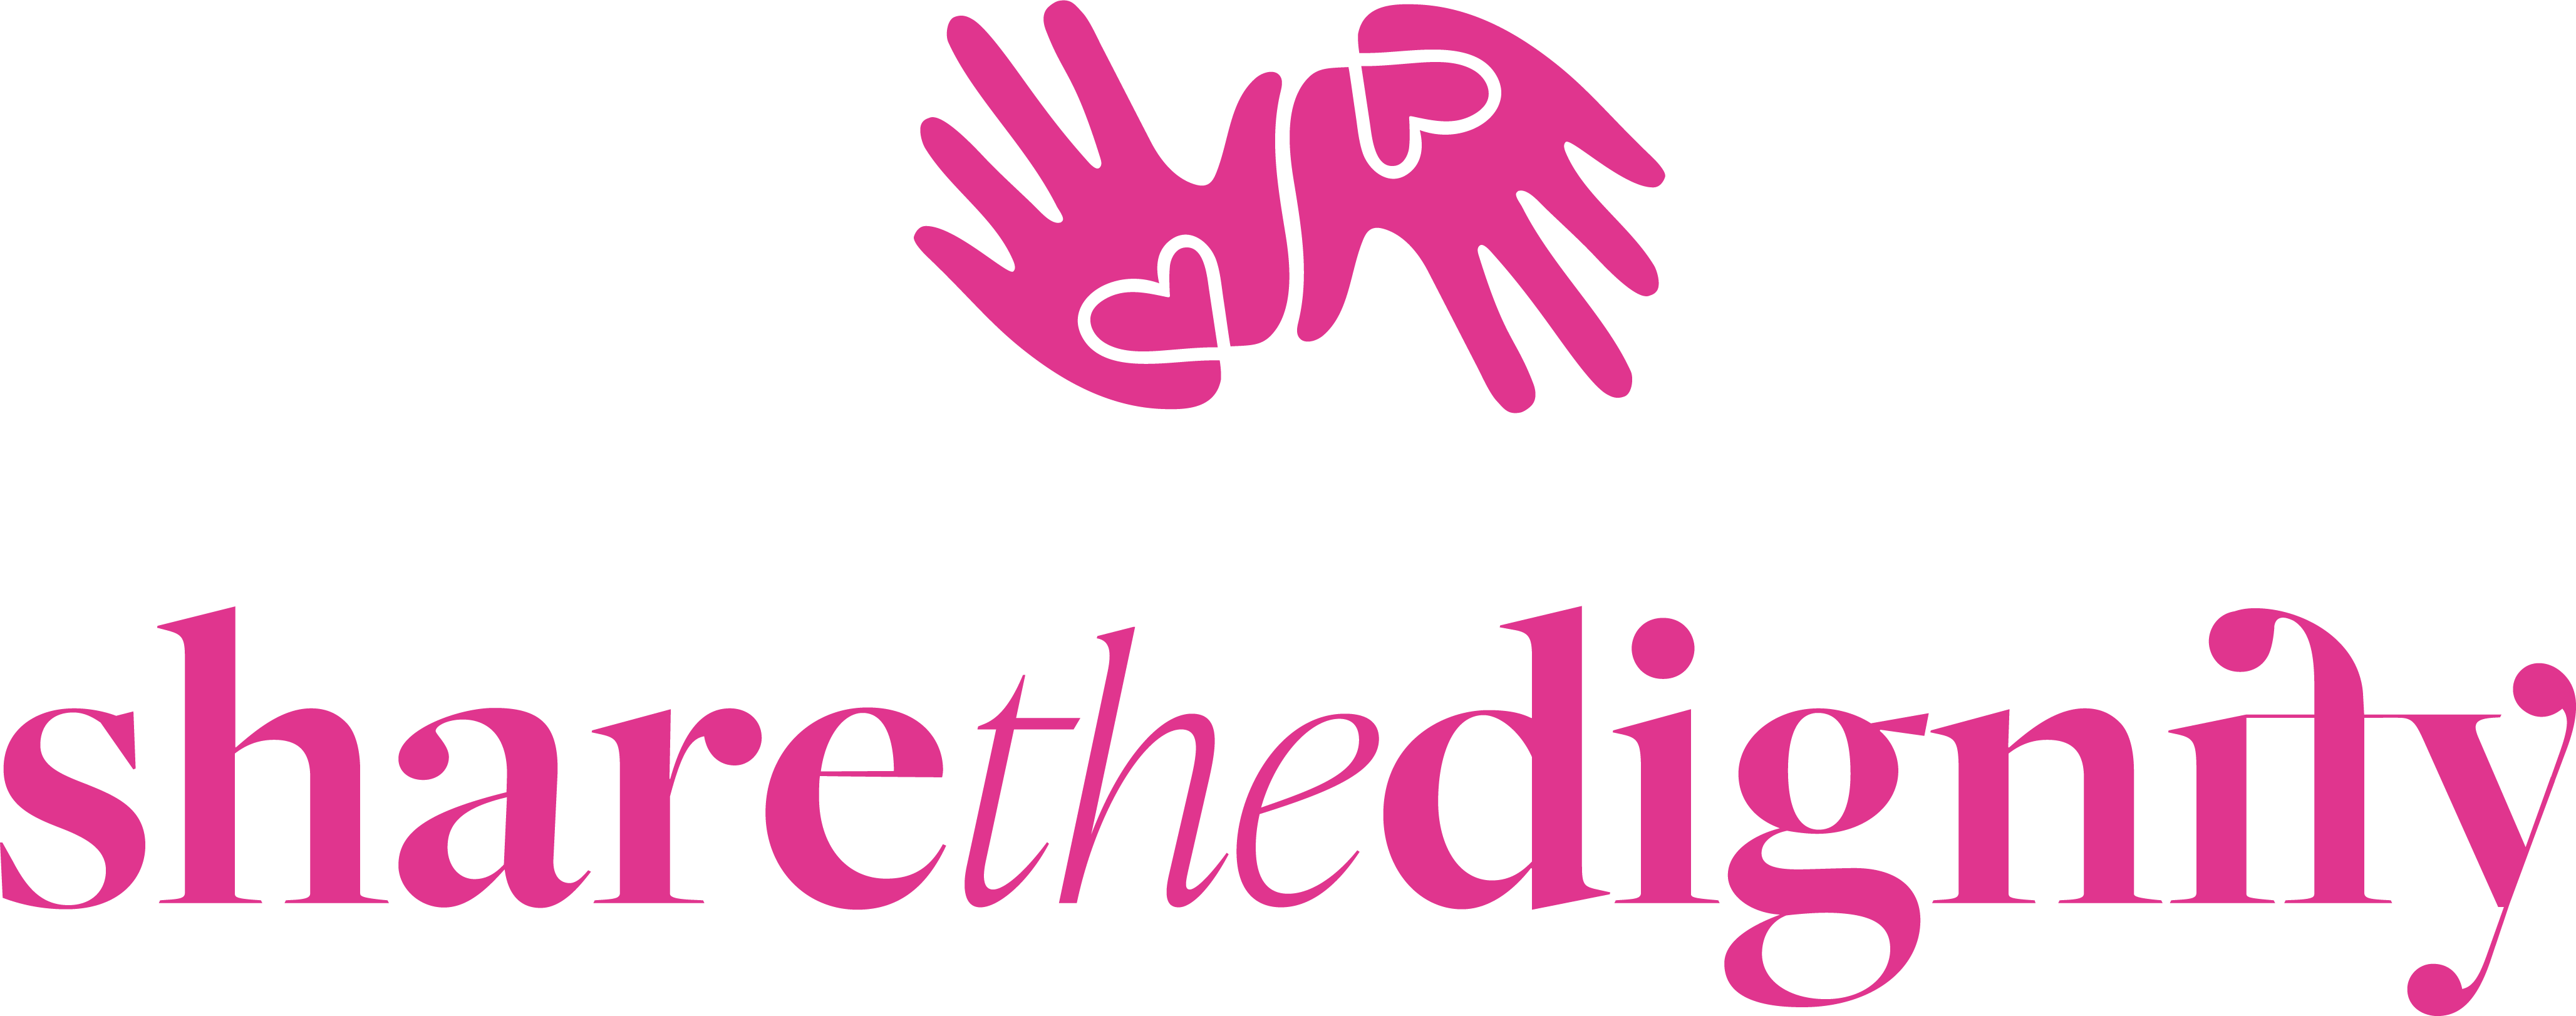 Share the dignity logo